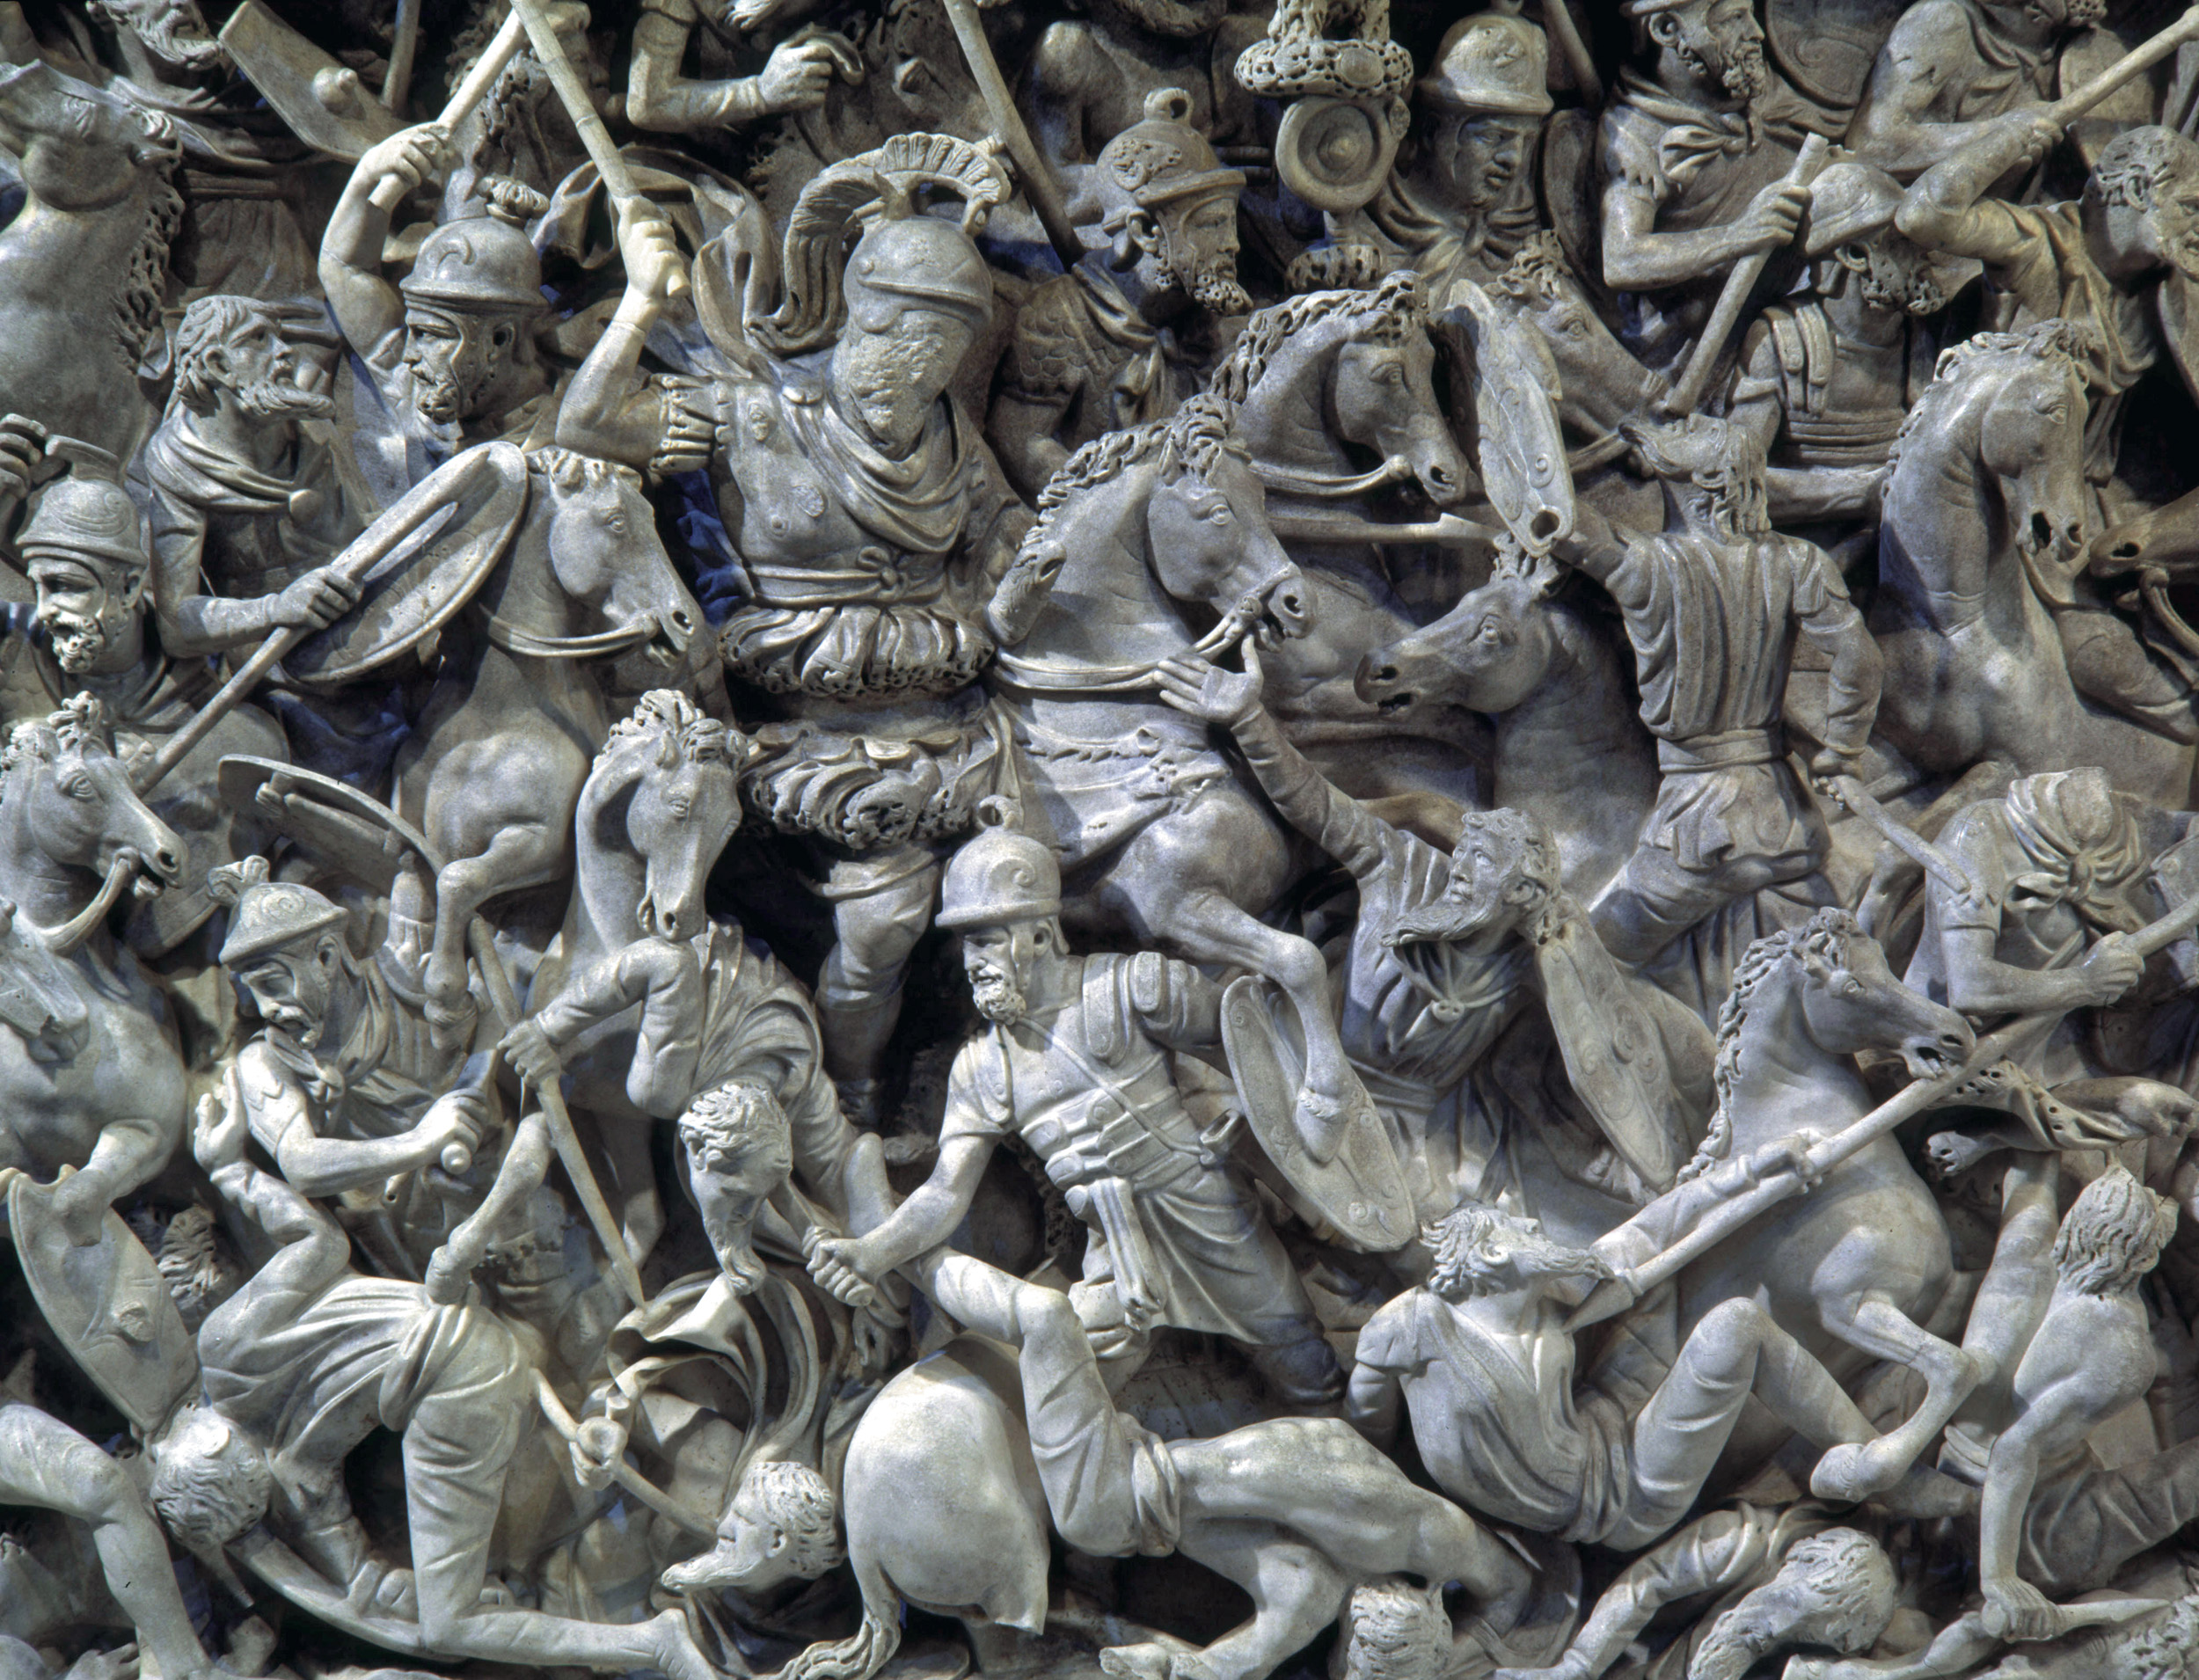 This high-relief sculpture carved on a sarcophagus of the 2nd century ably depicts the confusion and havoc of battle between Romans and Celtic warriors.